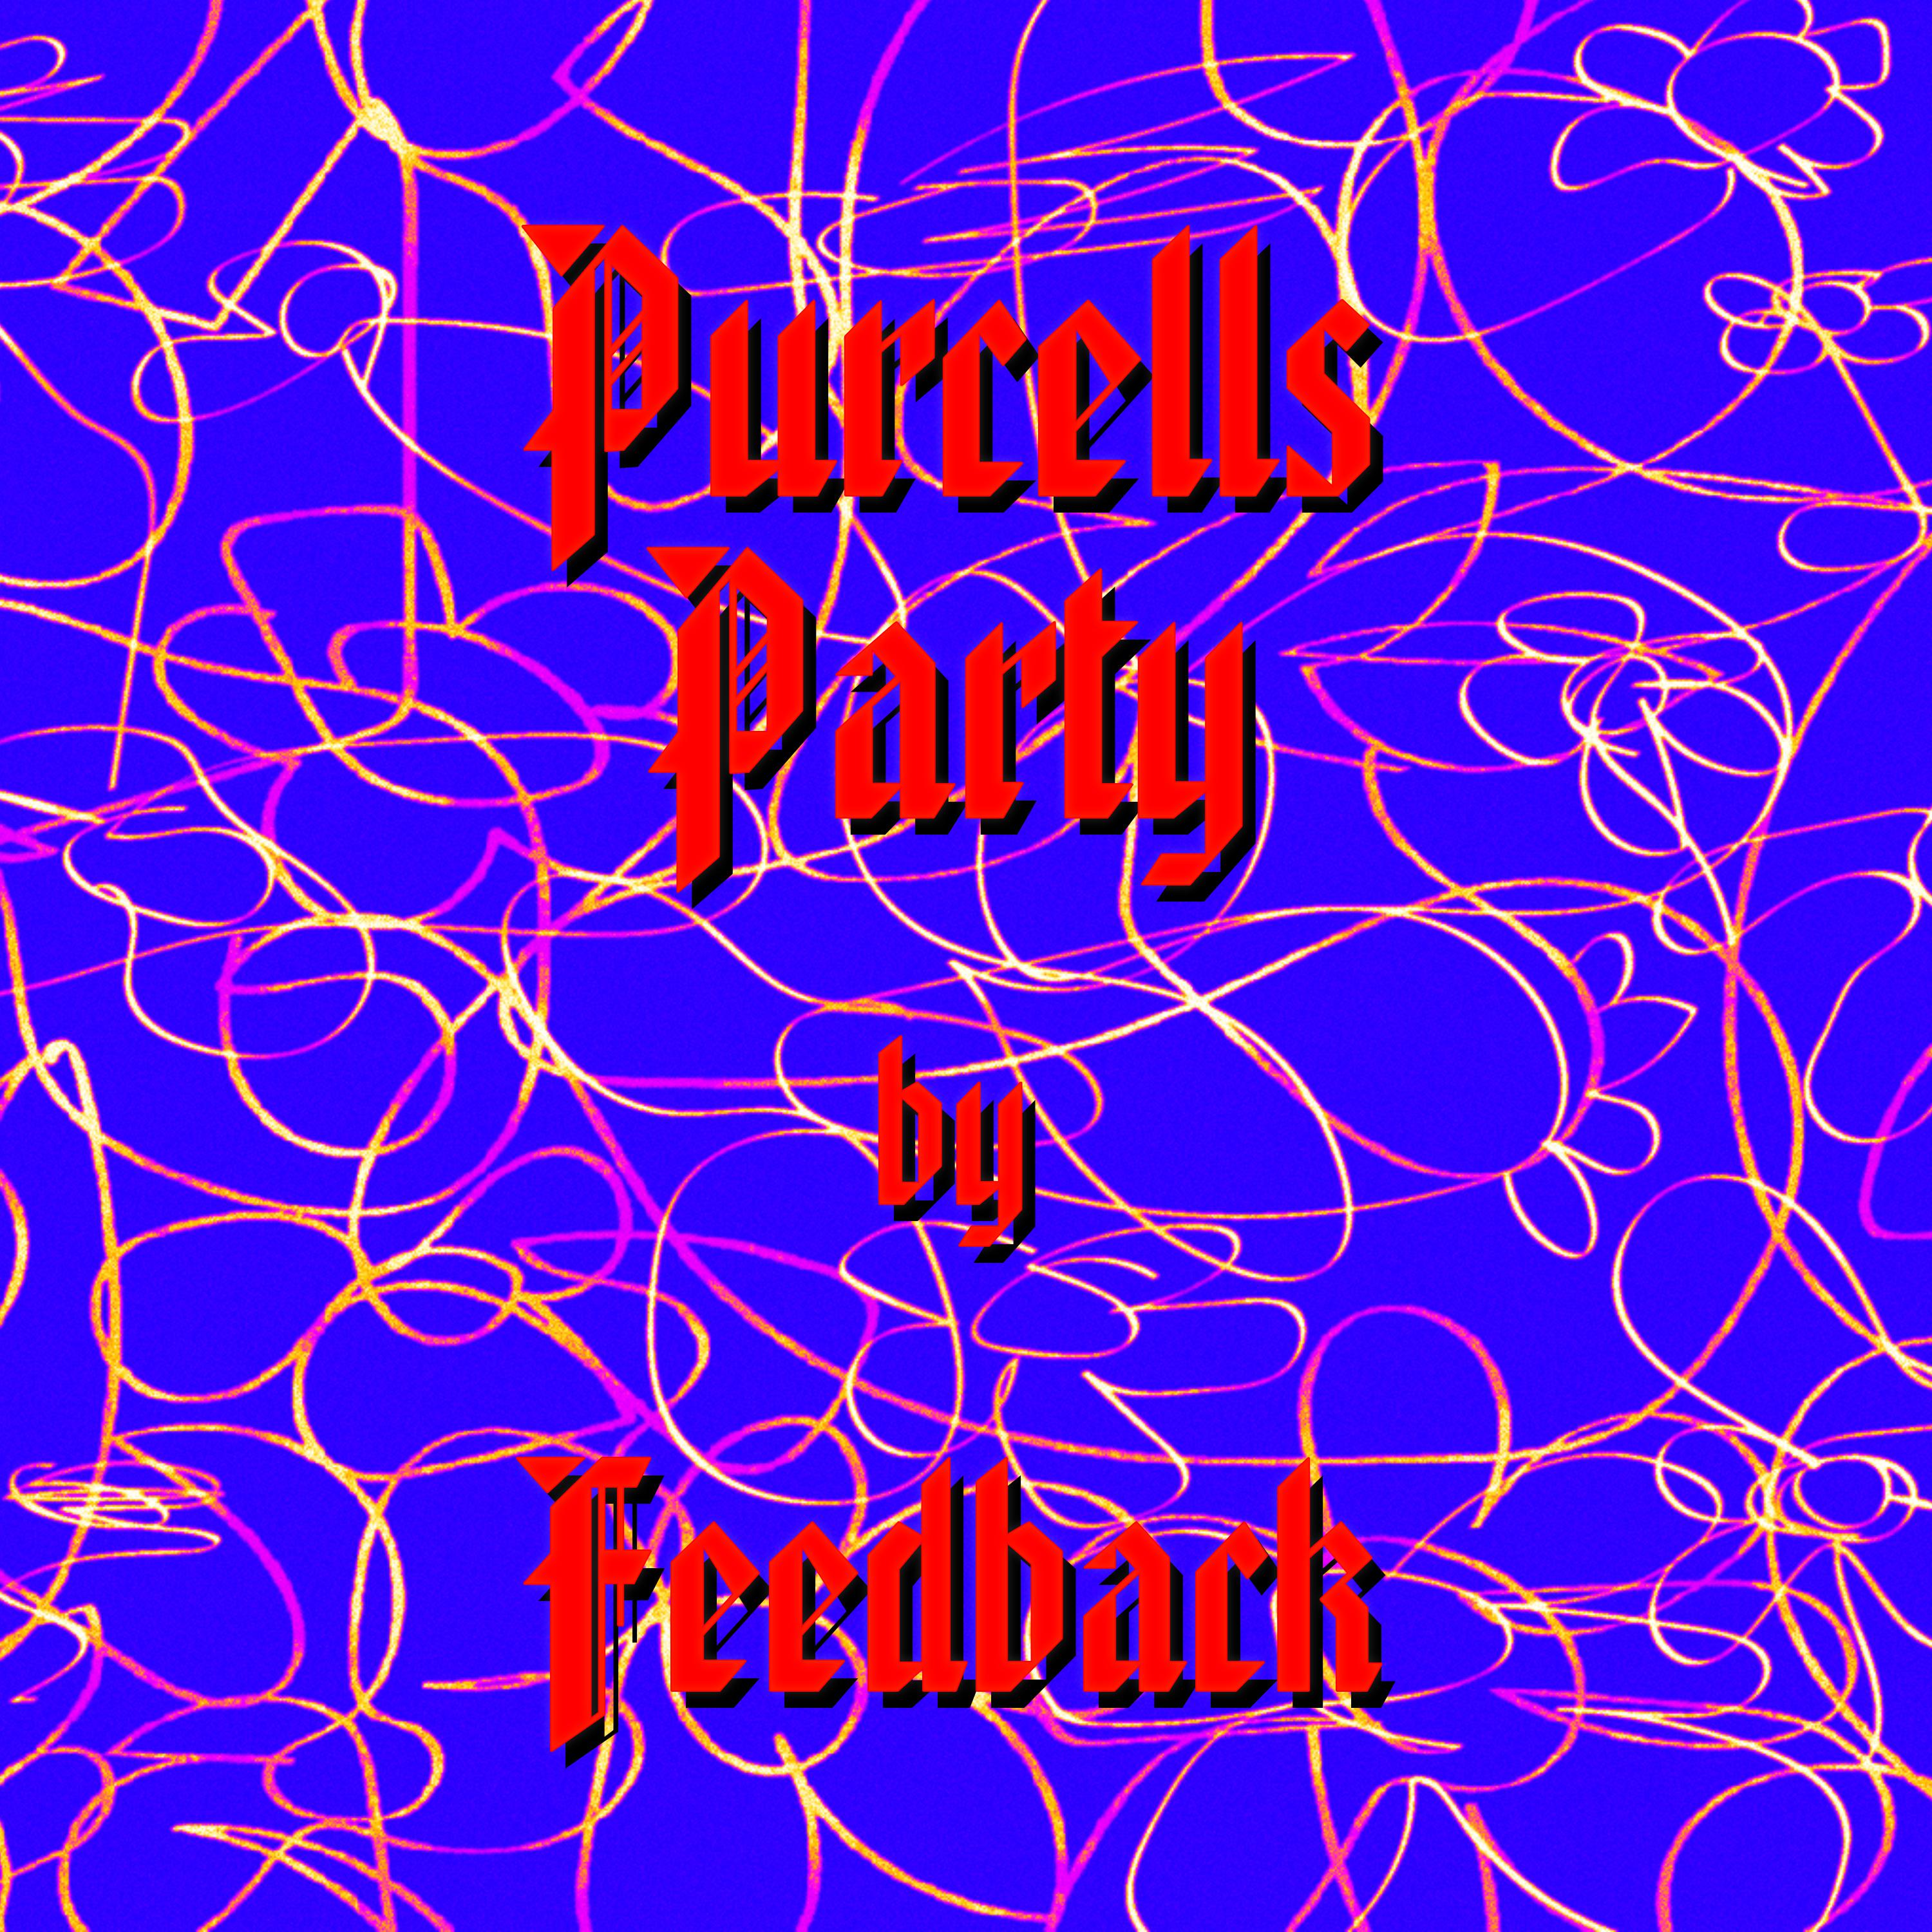 Purcell's Party